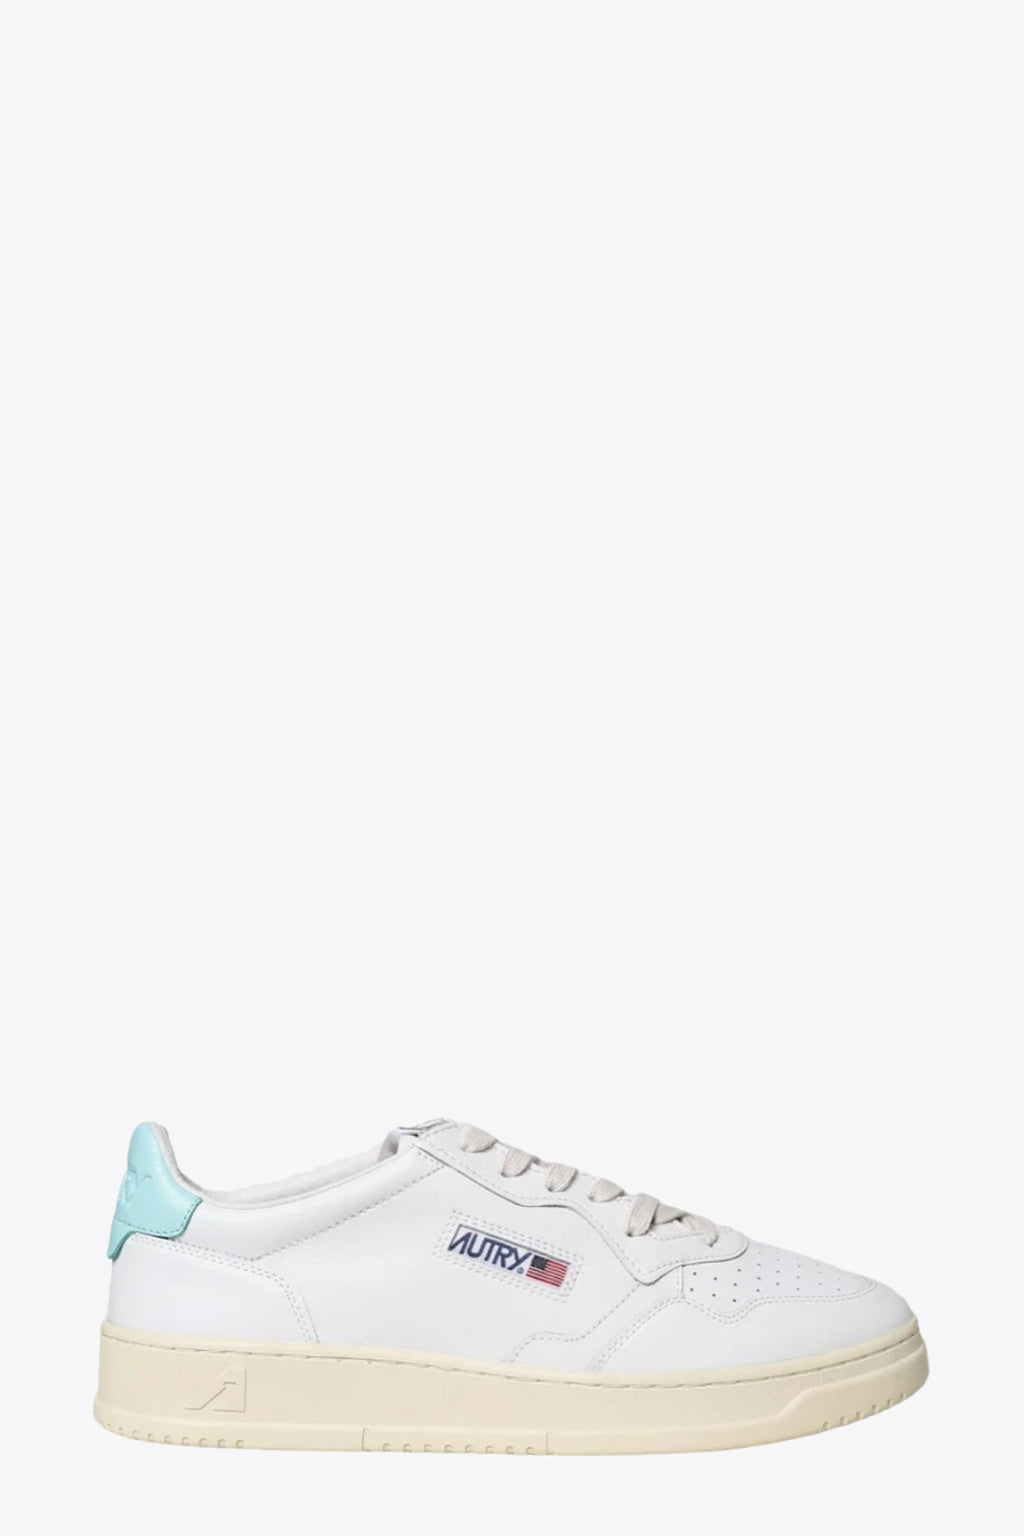 alt-image__White-leather-low-sneaker-with-turquoise-back-tab---Medalist